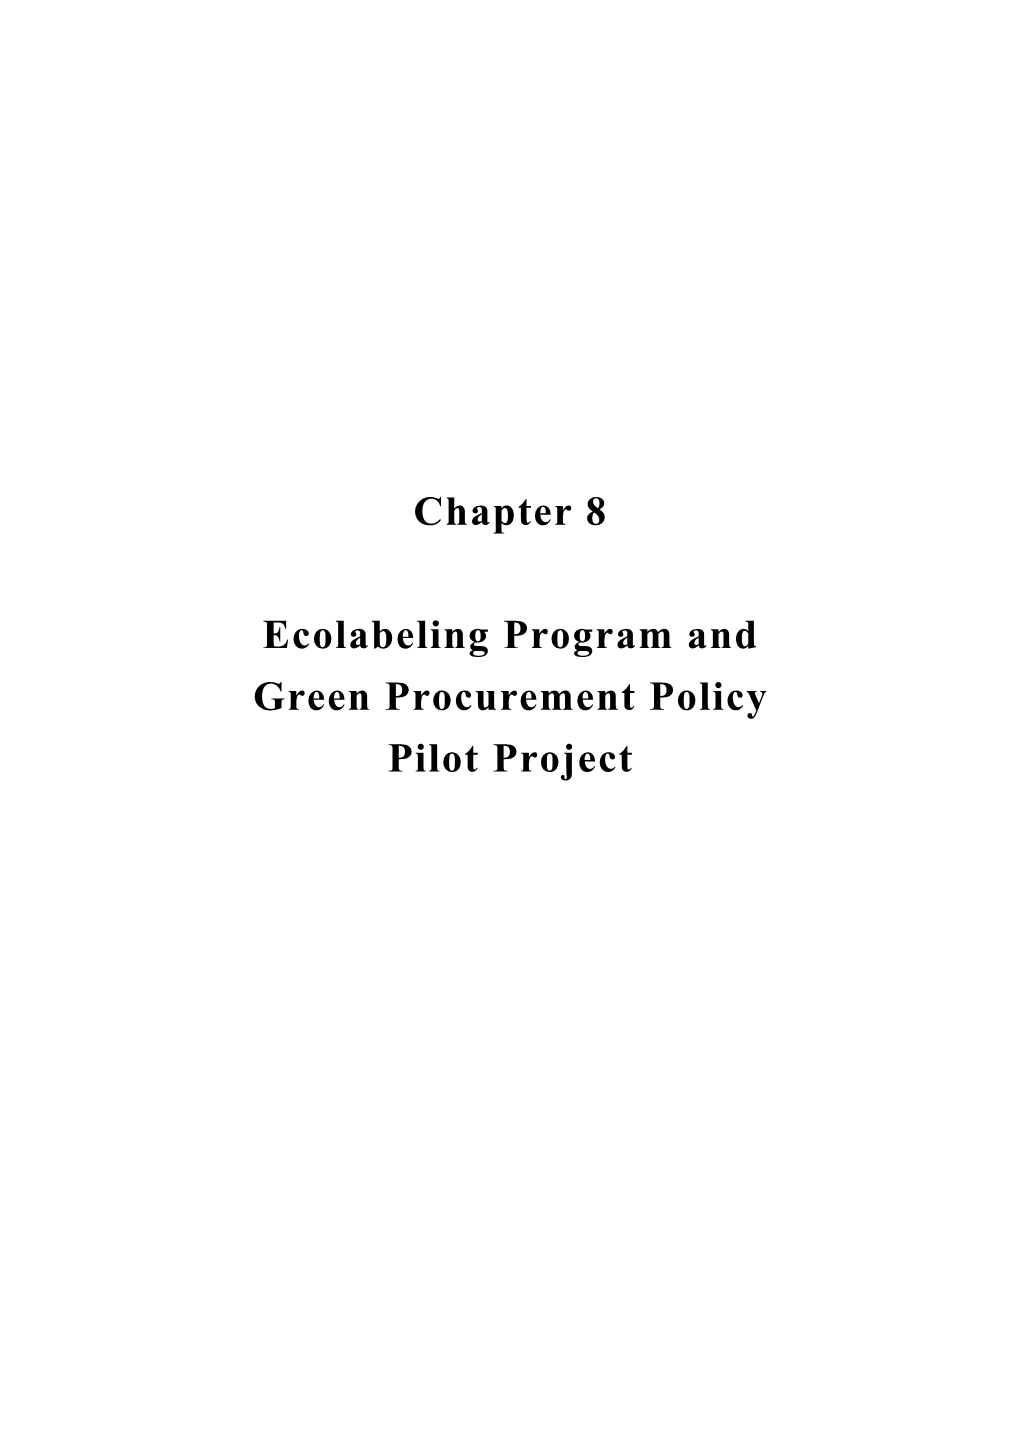 Chapter 8 Ecolabeling Program and Green Procurement Policy Pilot